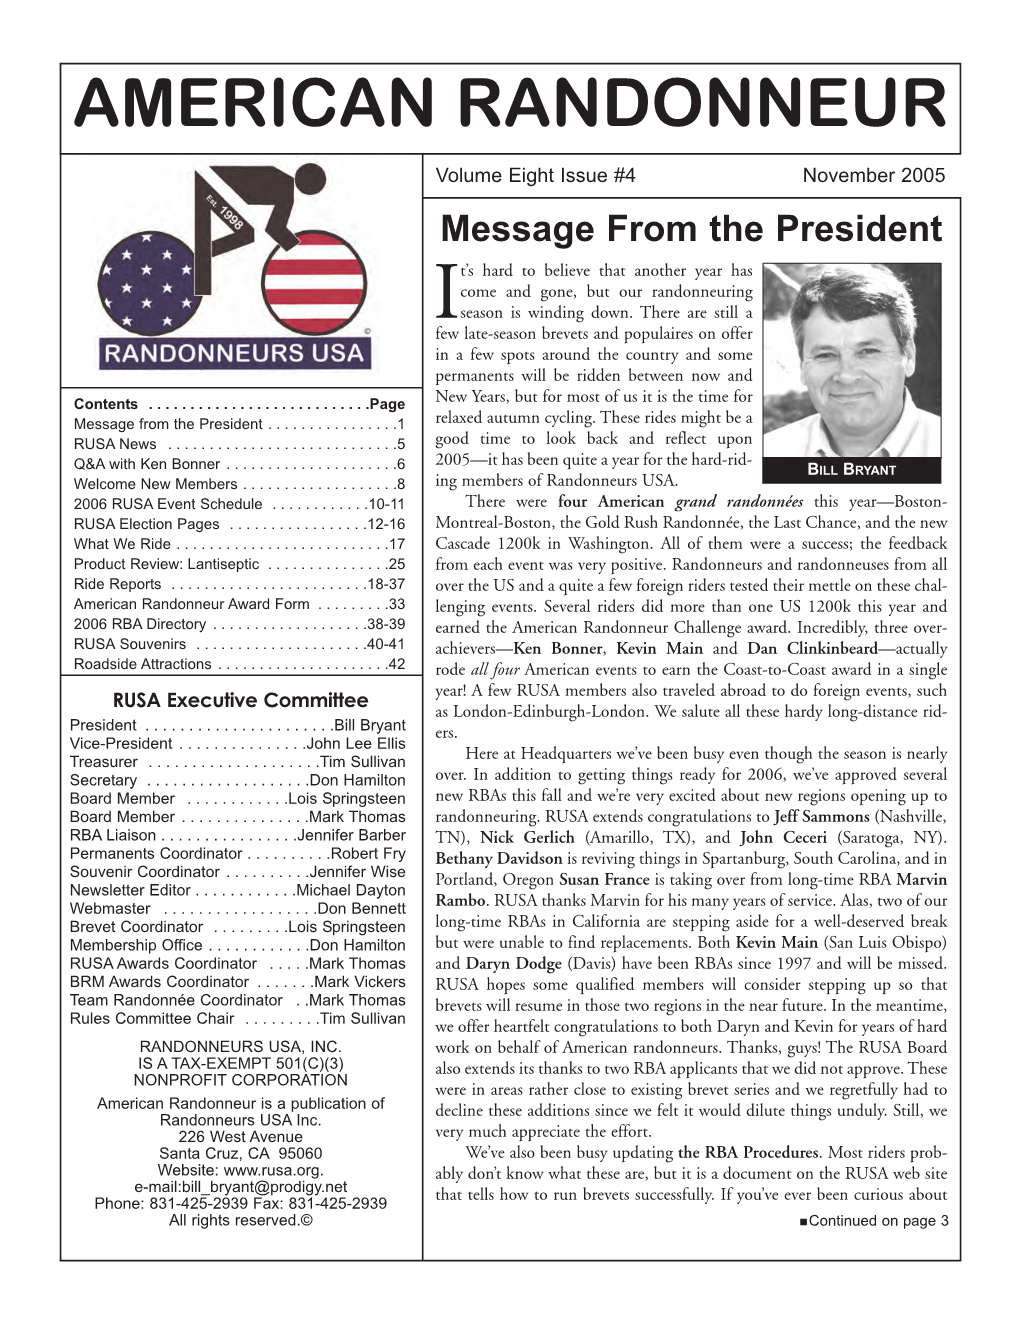 RUSA Newsletter Is Mailed We Were a Team and We That Early, We Ate Damp Left - Via Third Class Mail to the Address on File Would Finish Together